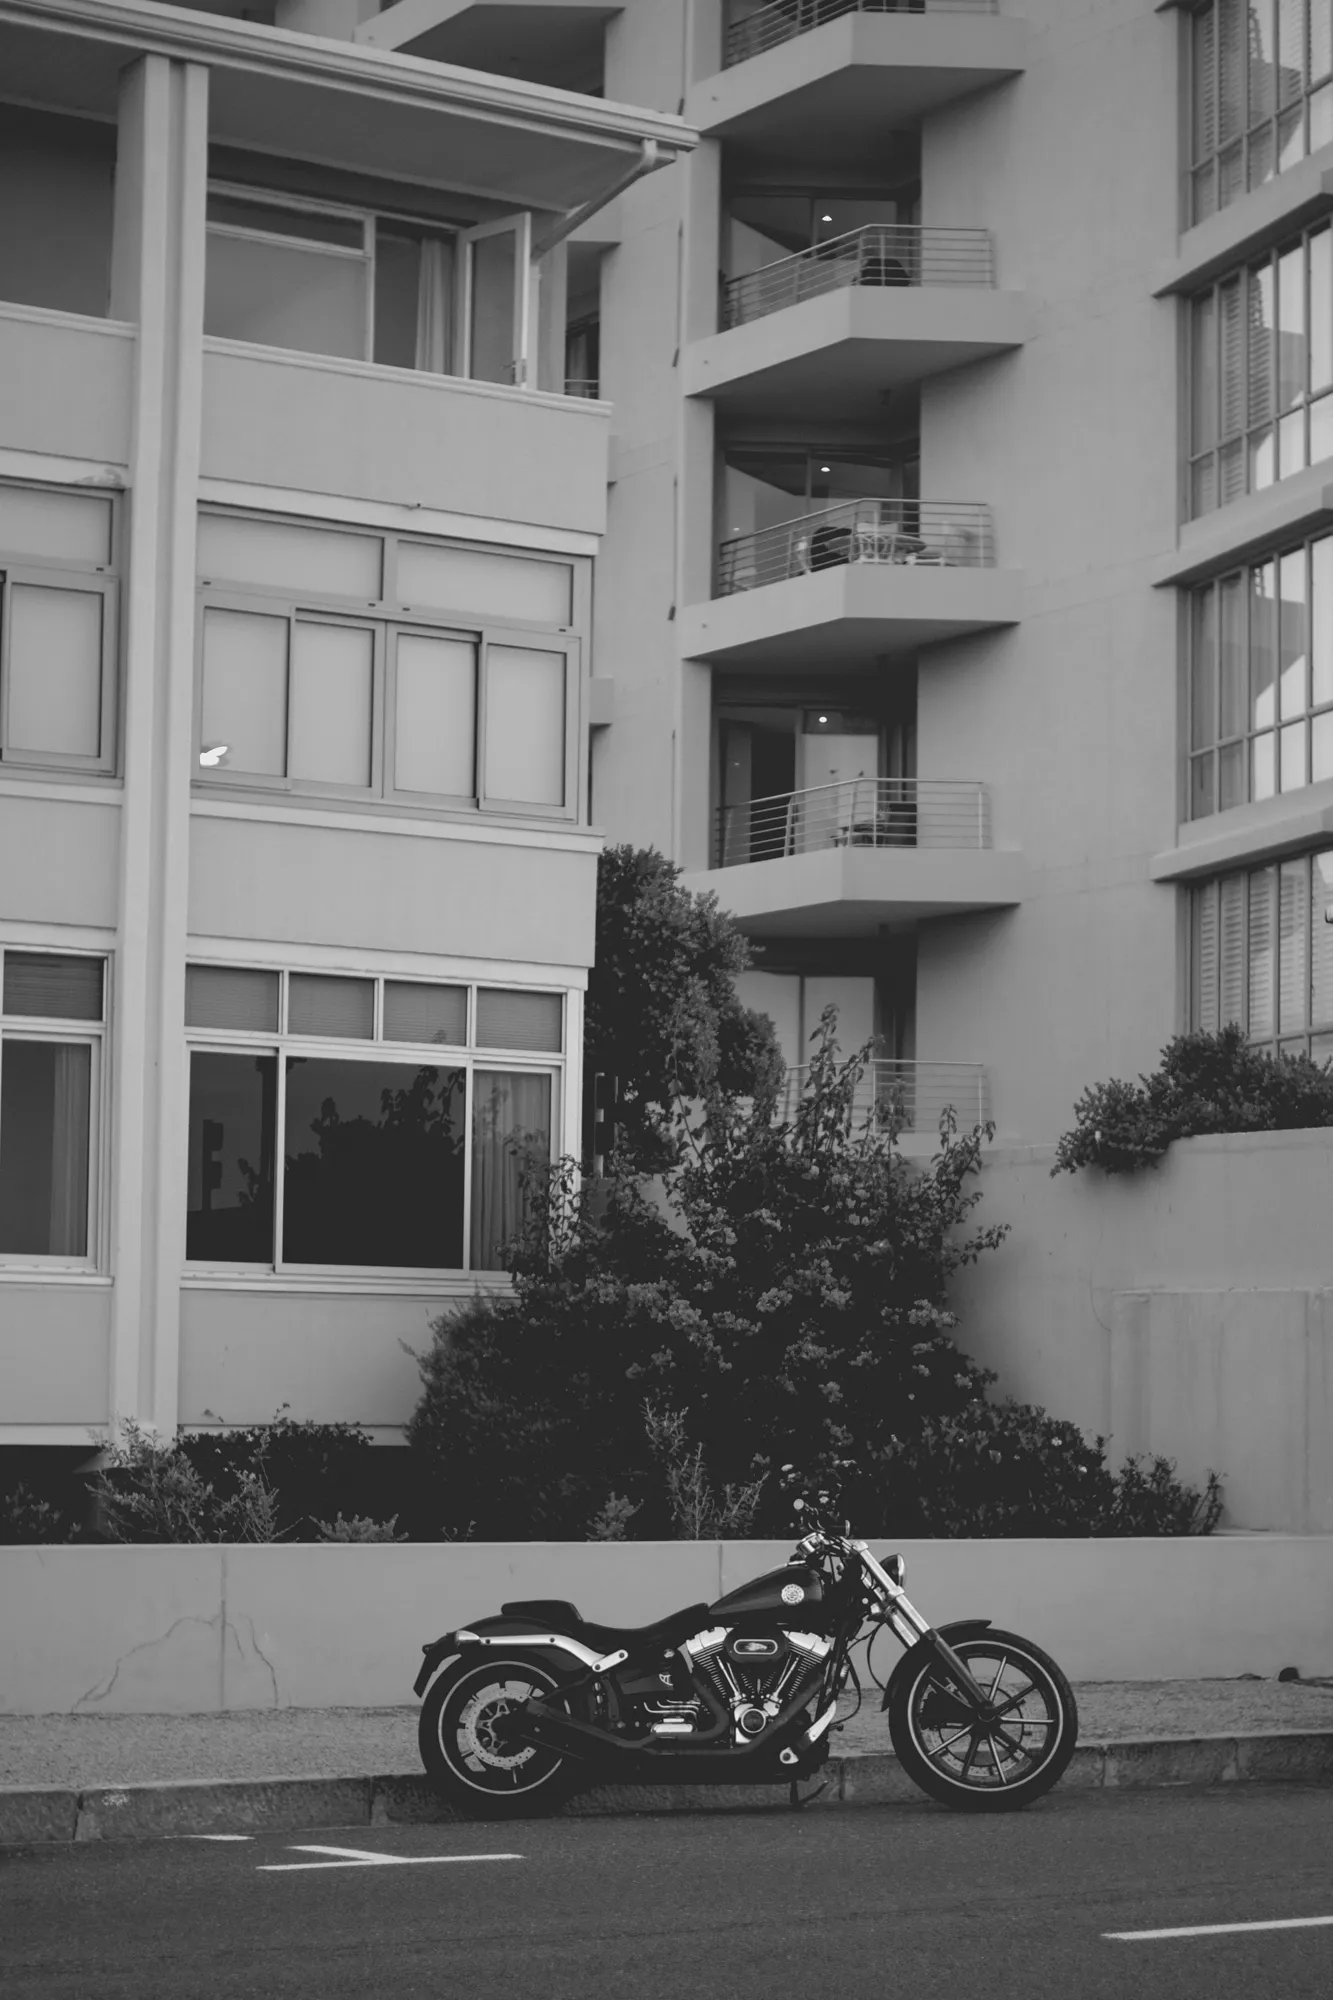 2022-02-15 - Cape Town - Bike parked in front of building